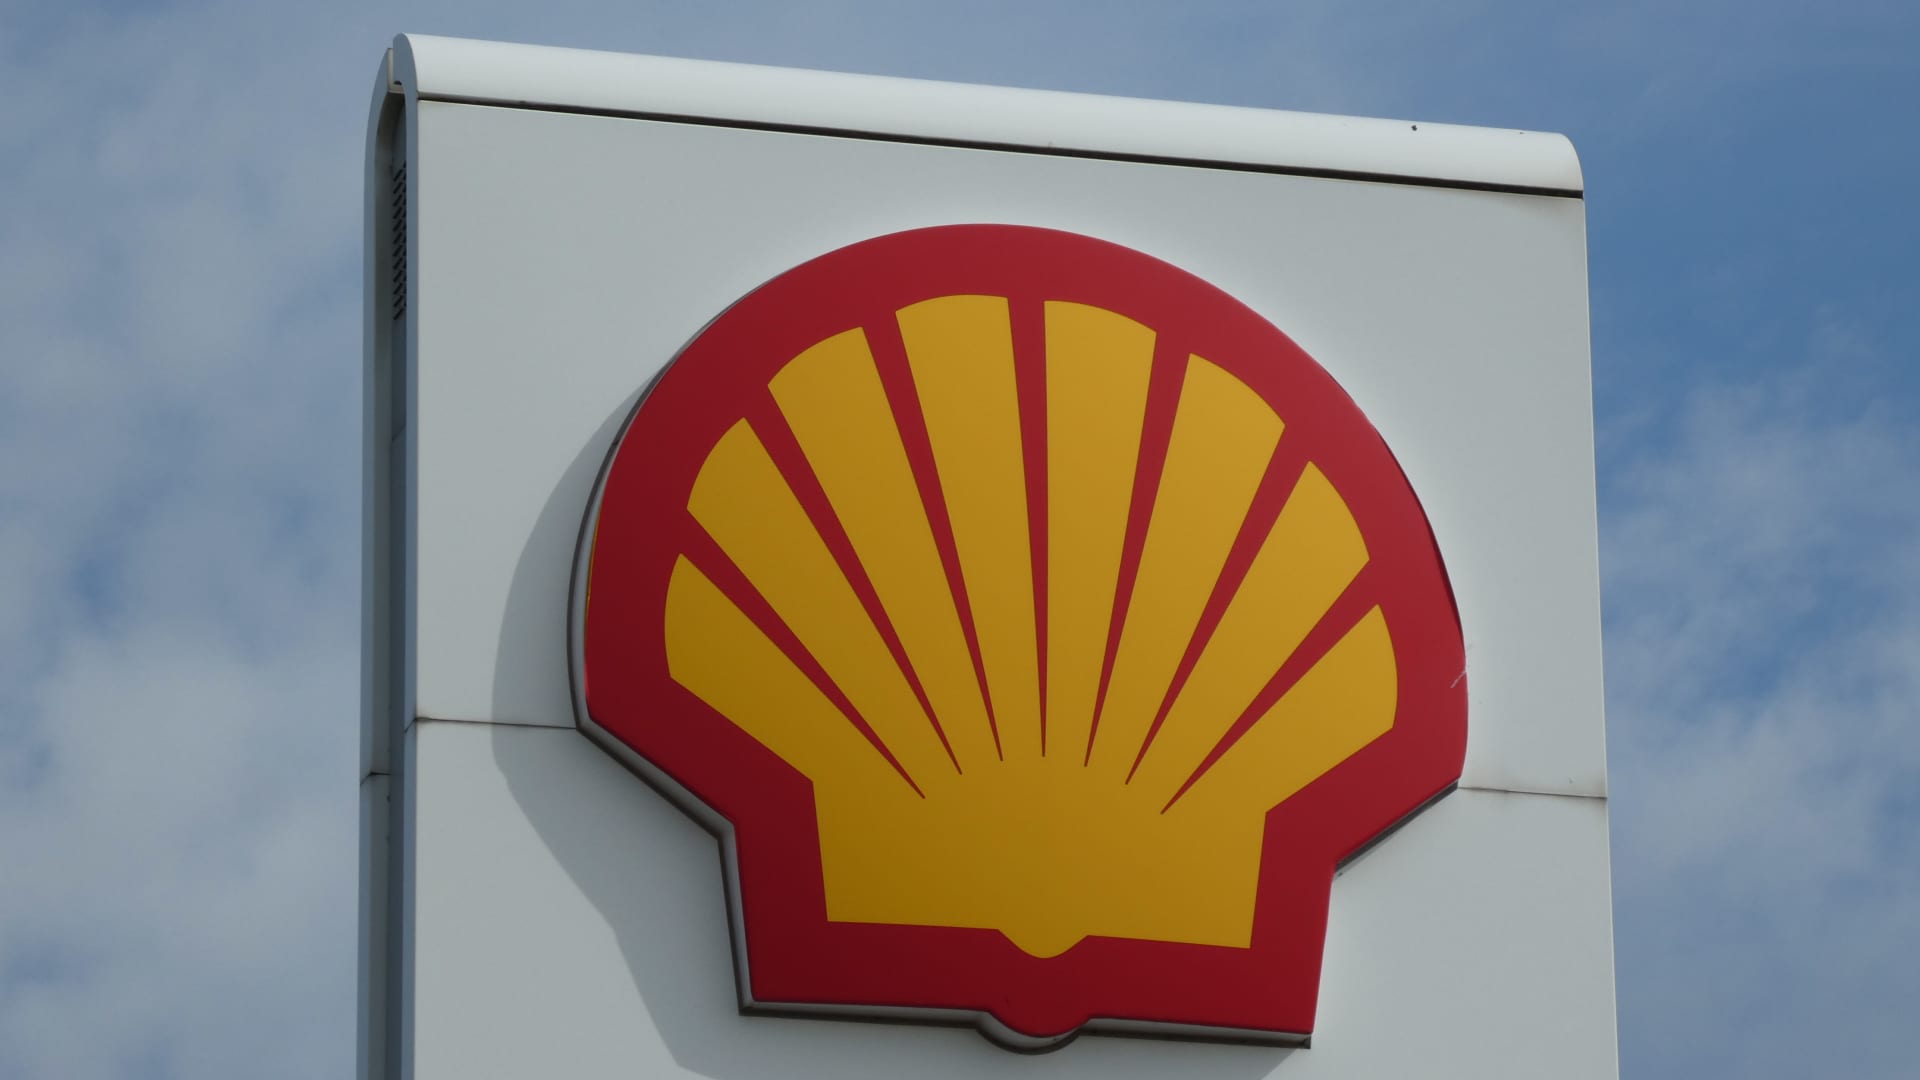 Oil giant Shell misses expectations with $5.1 billion in second-quarter profit